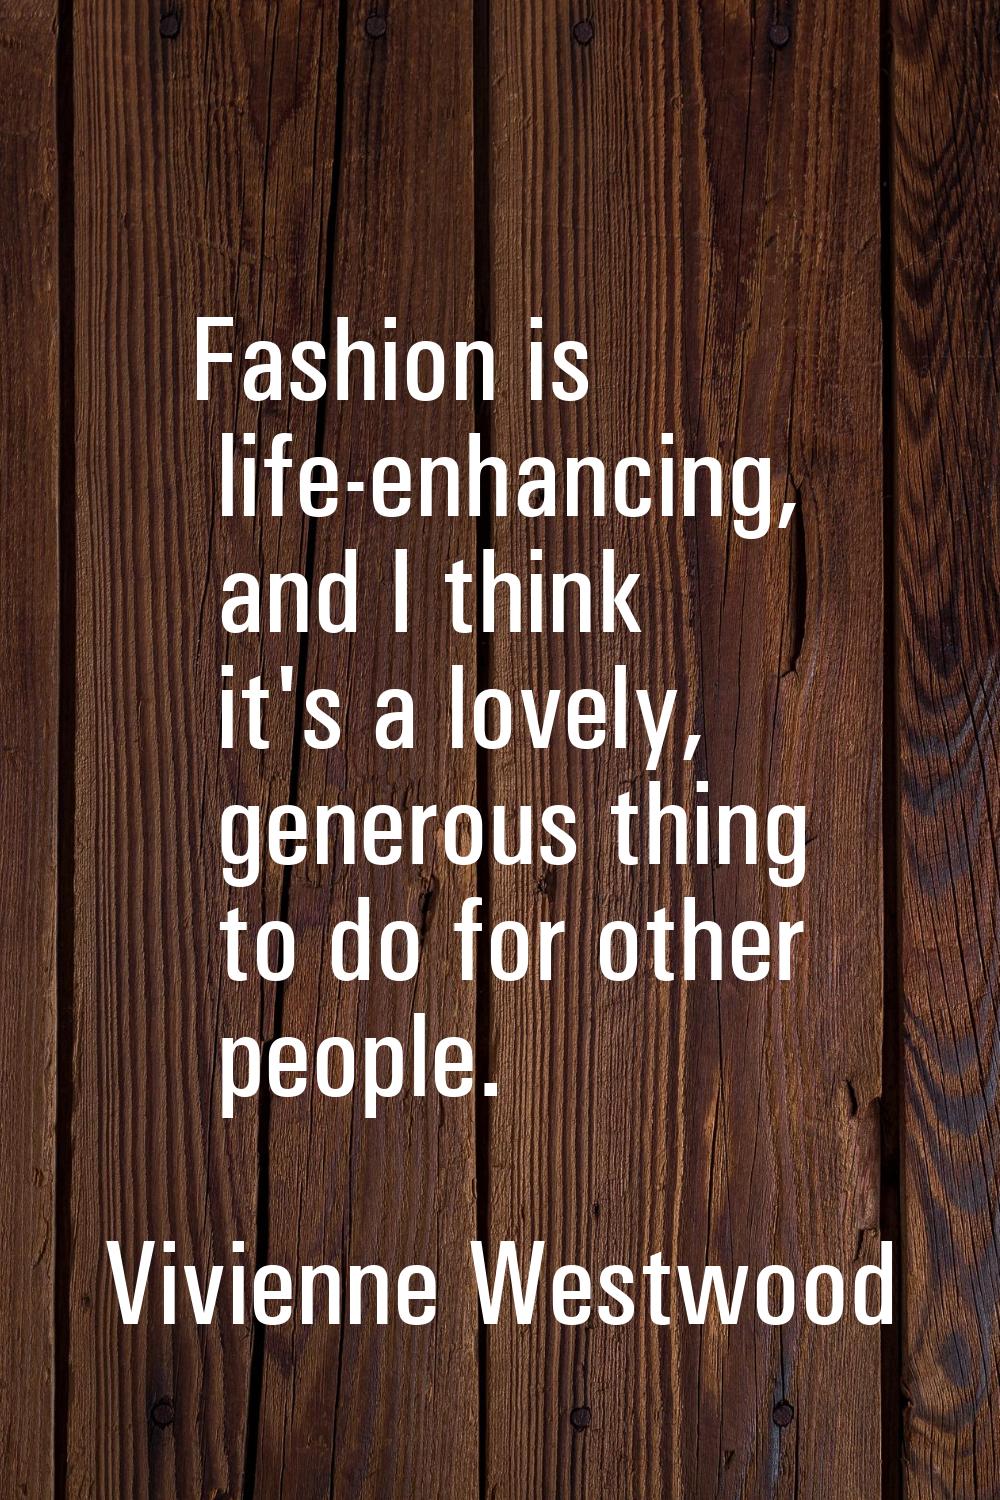 Fashion is life-enhancing, and I think it's a lovely, generous thing to do for other people.